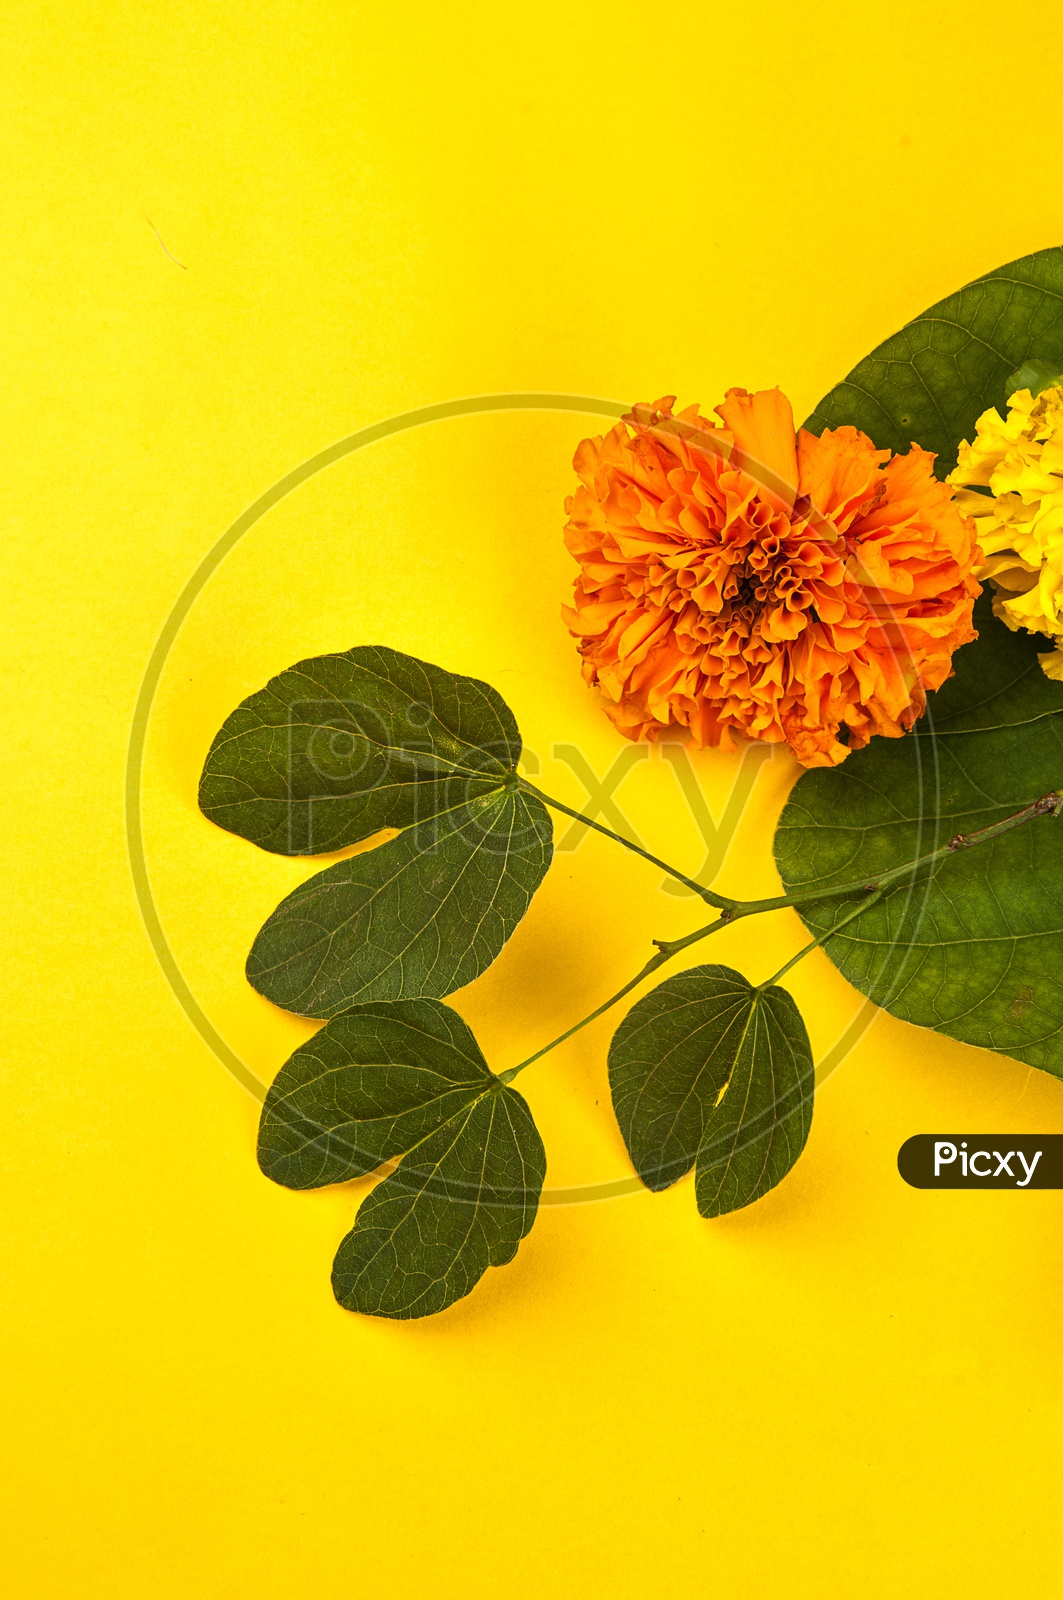 Bauhinia racemosa leaves with marigold flower on yellow background